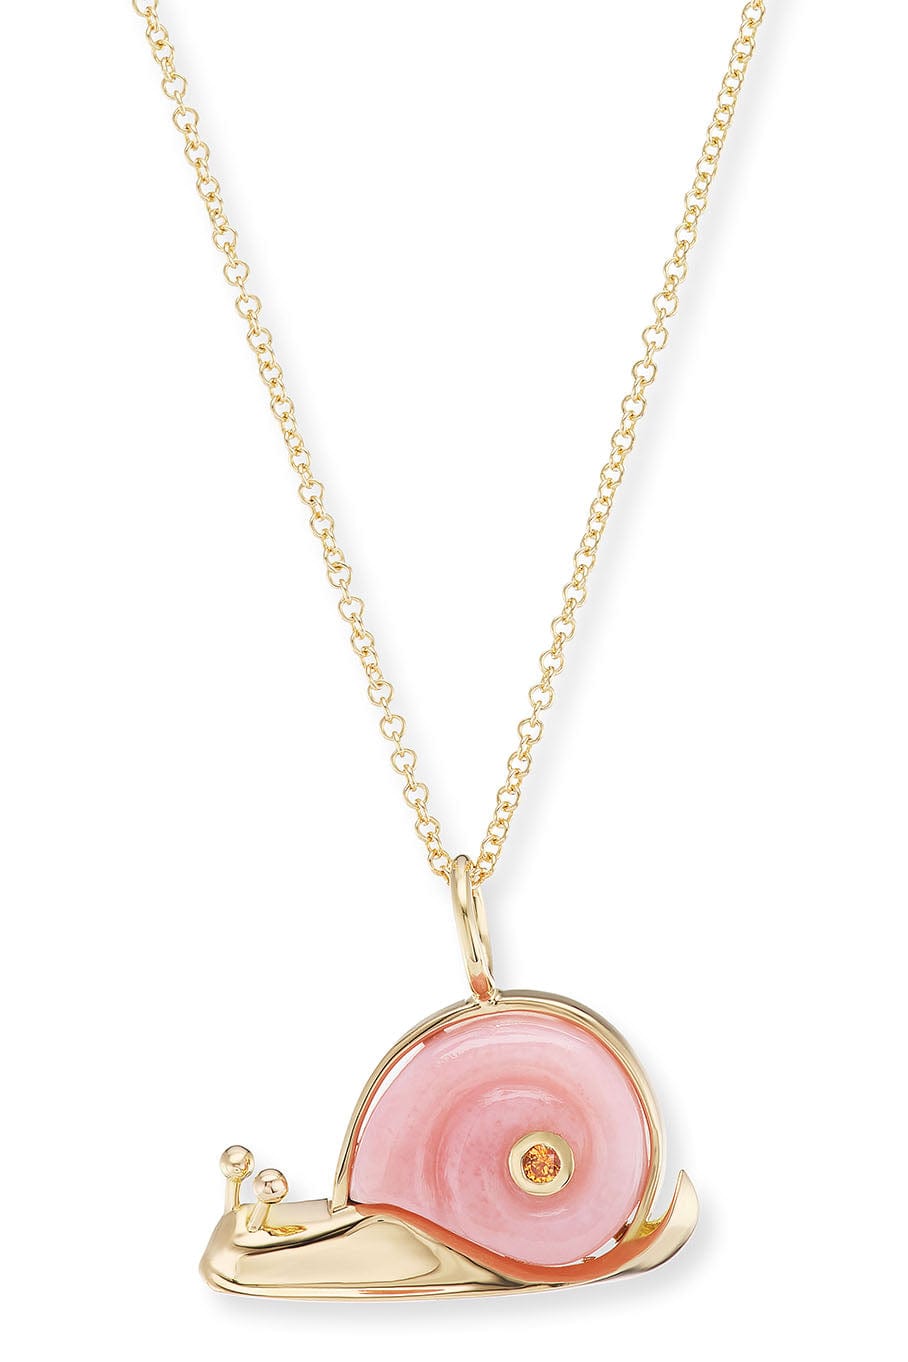 BRENT NEALE-Small Pink Opal Snail Pendant Necklace-YELLOW GOLD